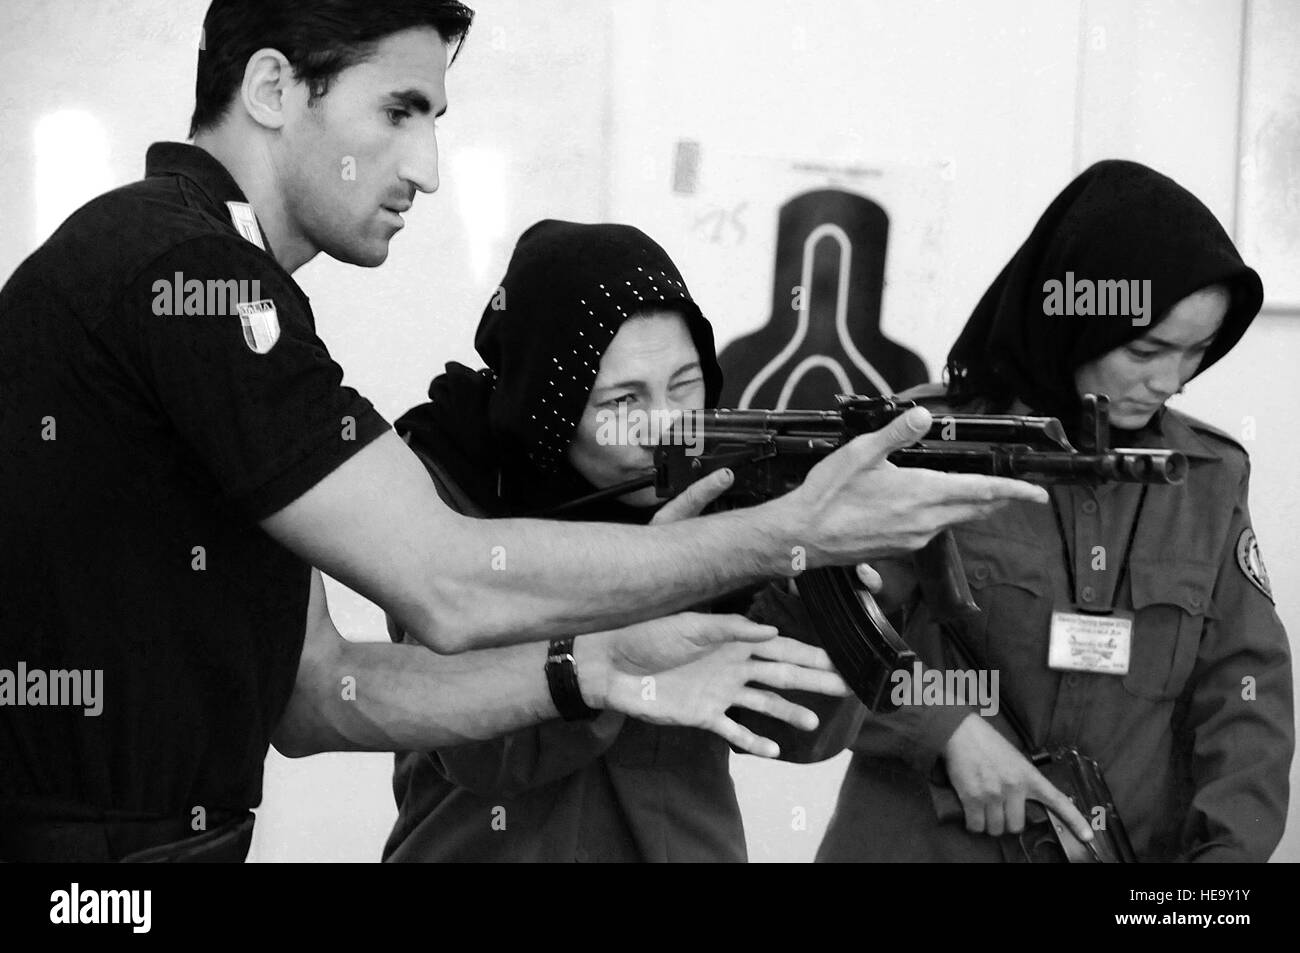 100710-F-1020B-006 copy Kabul - An Italian Carabinieri shows a female Afghan National Police recruit how to aim an AMD-65, a Hungarian version of the AK-47, during an eight-week basic police training course at the Central Training Center in Kabul. Afghan President Hamid Karzai has mandated an additional 5,000 women be added to the ANP by 2014; they are needed to respect cultural norms while providing security.   Staff Sgt. Sarah Brown/) Stock Photo